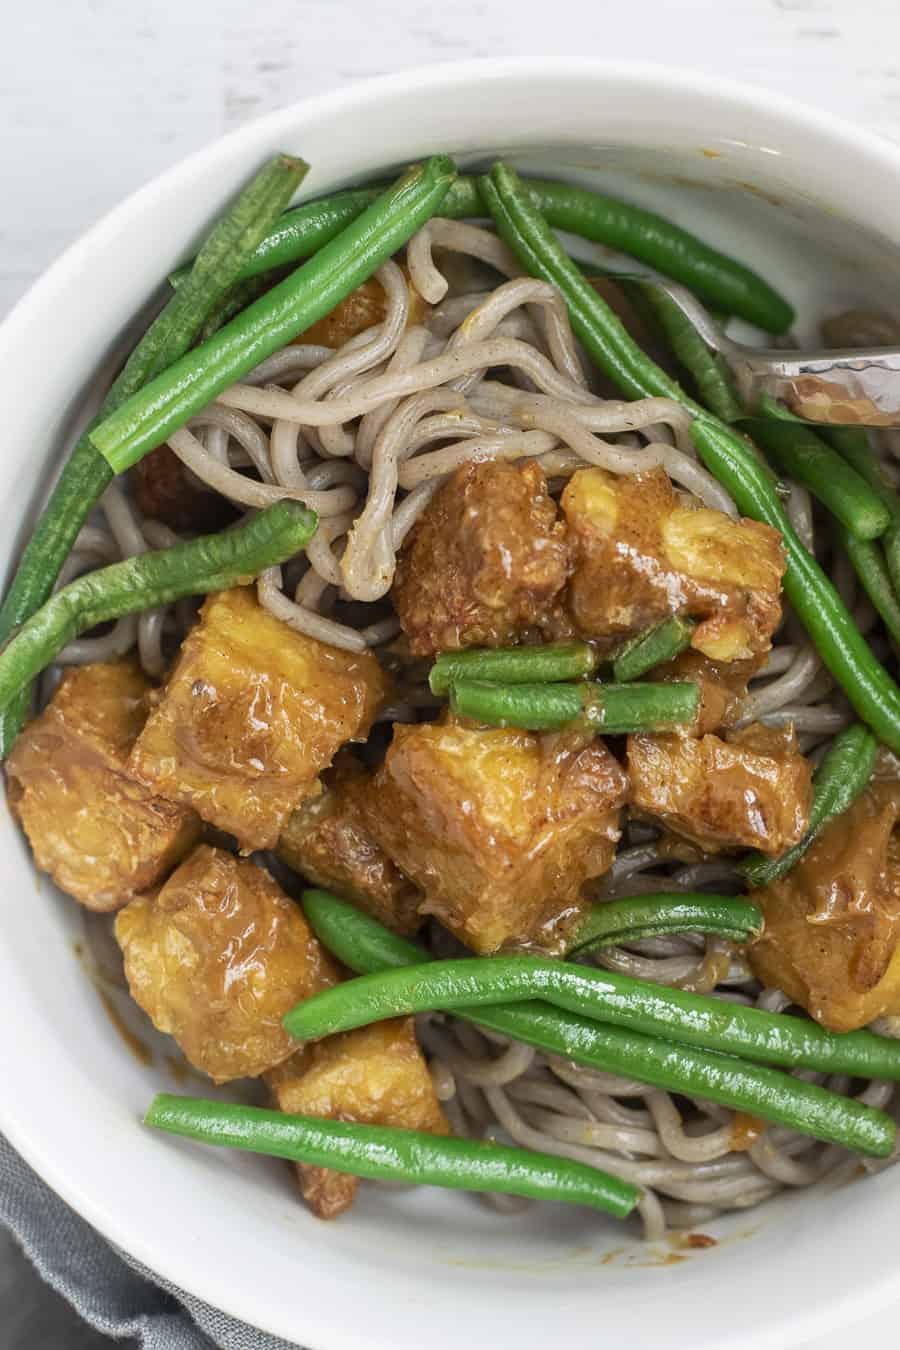 bowl of rice noodles with air fried tempeh in tempeh peanut sauce and green beans